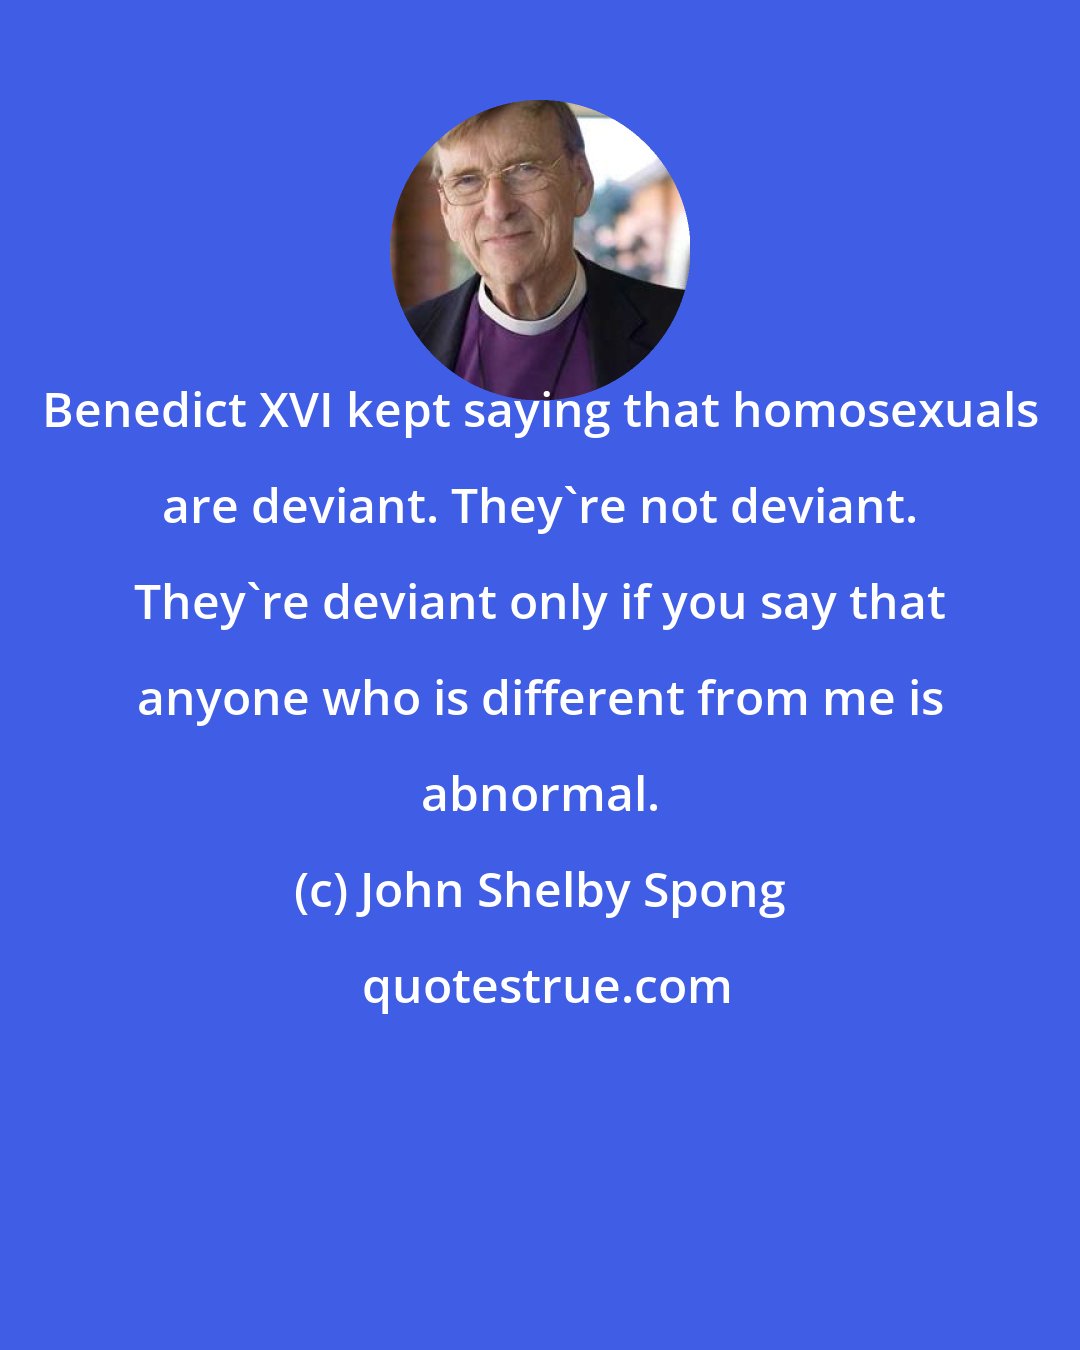 John Shelby Spong: Benedict XVI kept saying that homosexuals are deviant. They're not deviant. They're deviant only if you say that anyone who is different from me is abnormal.